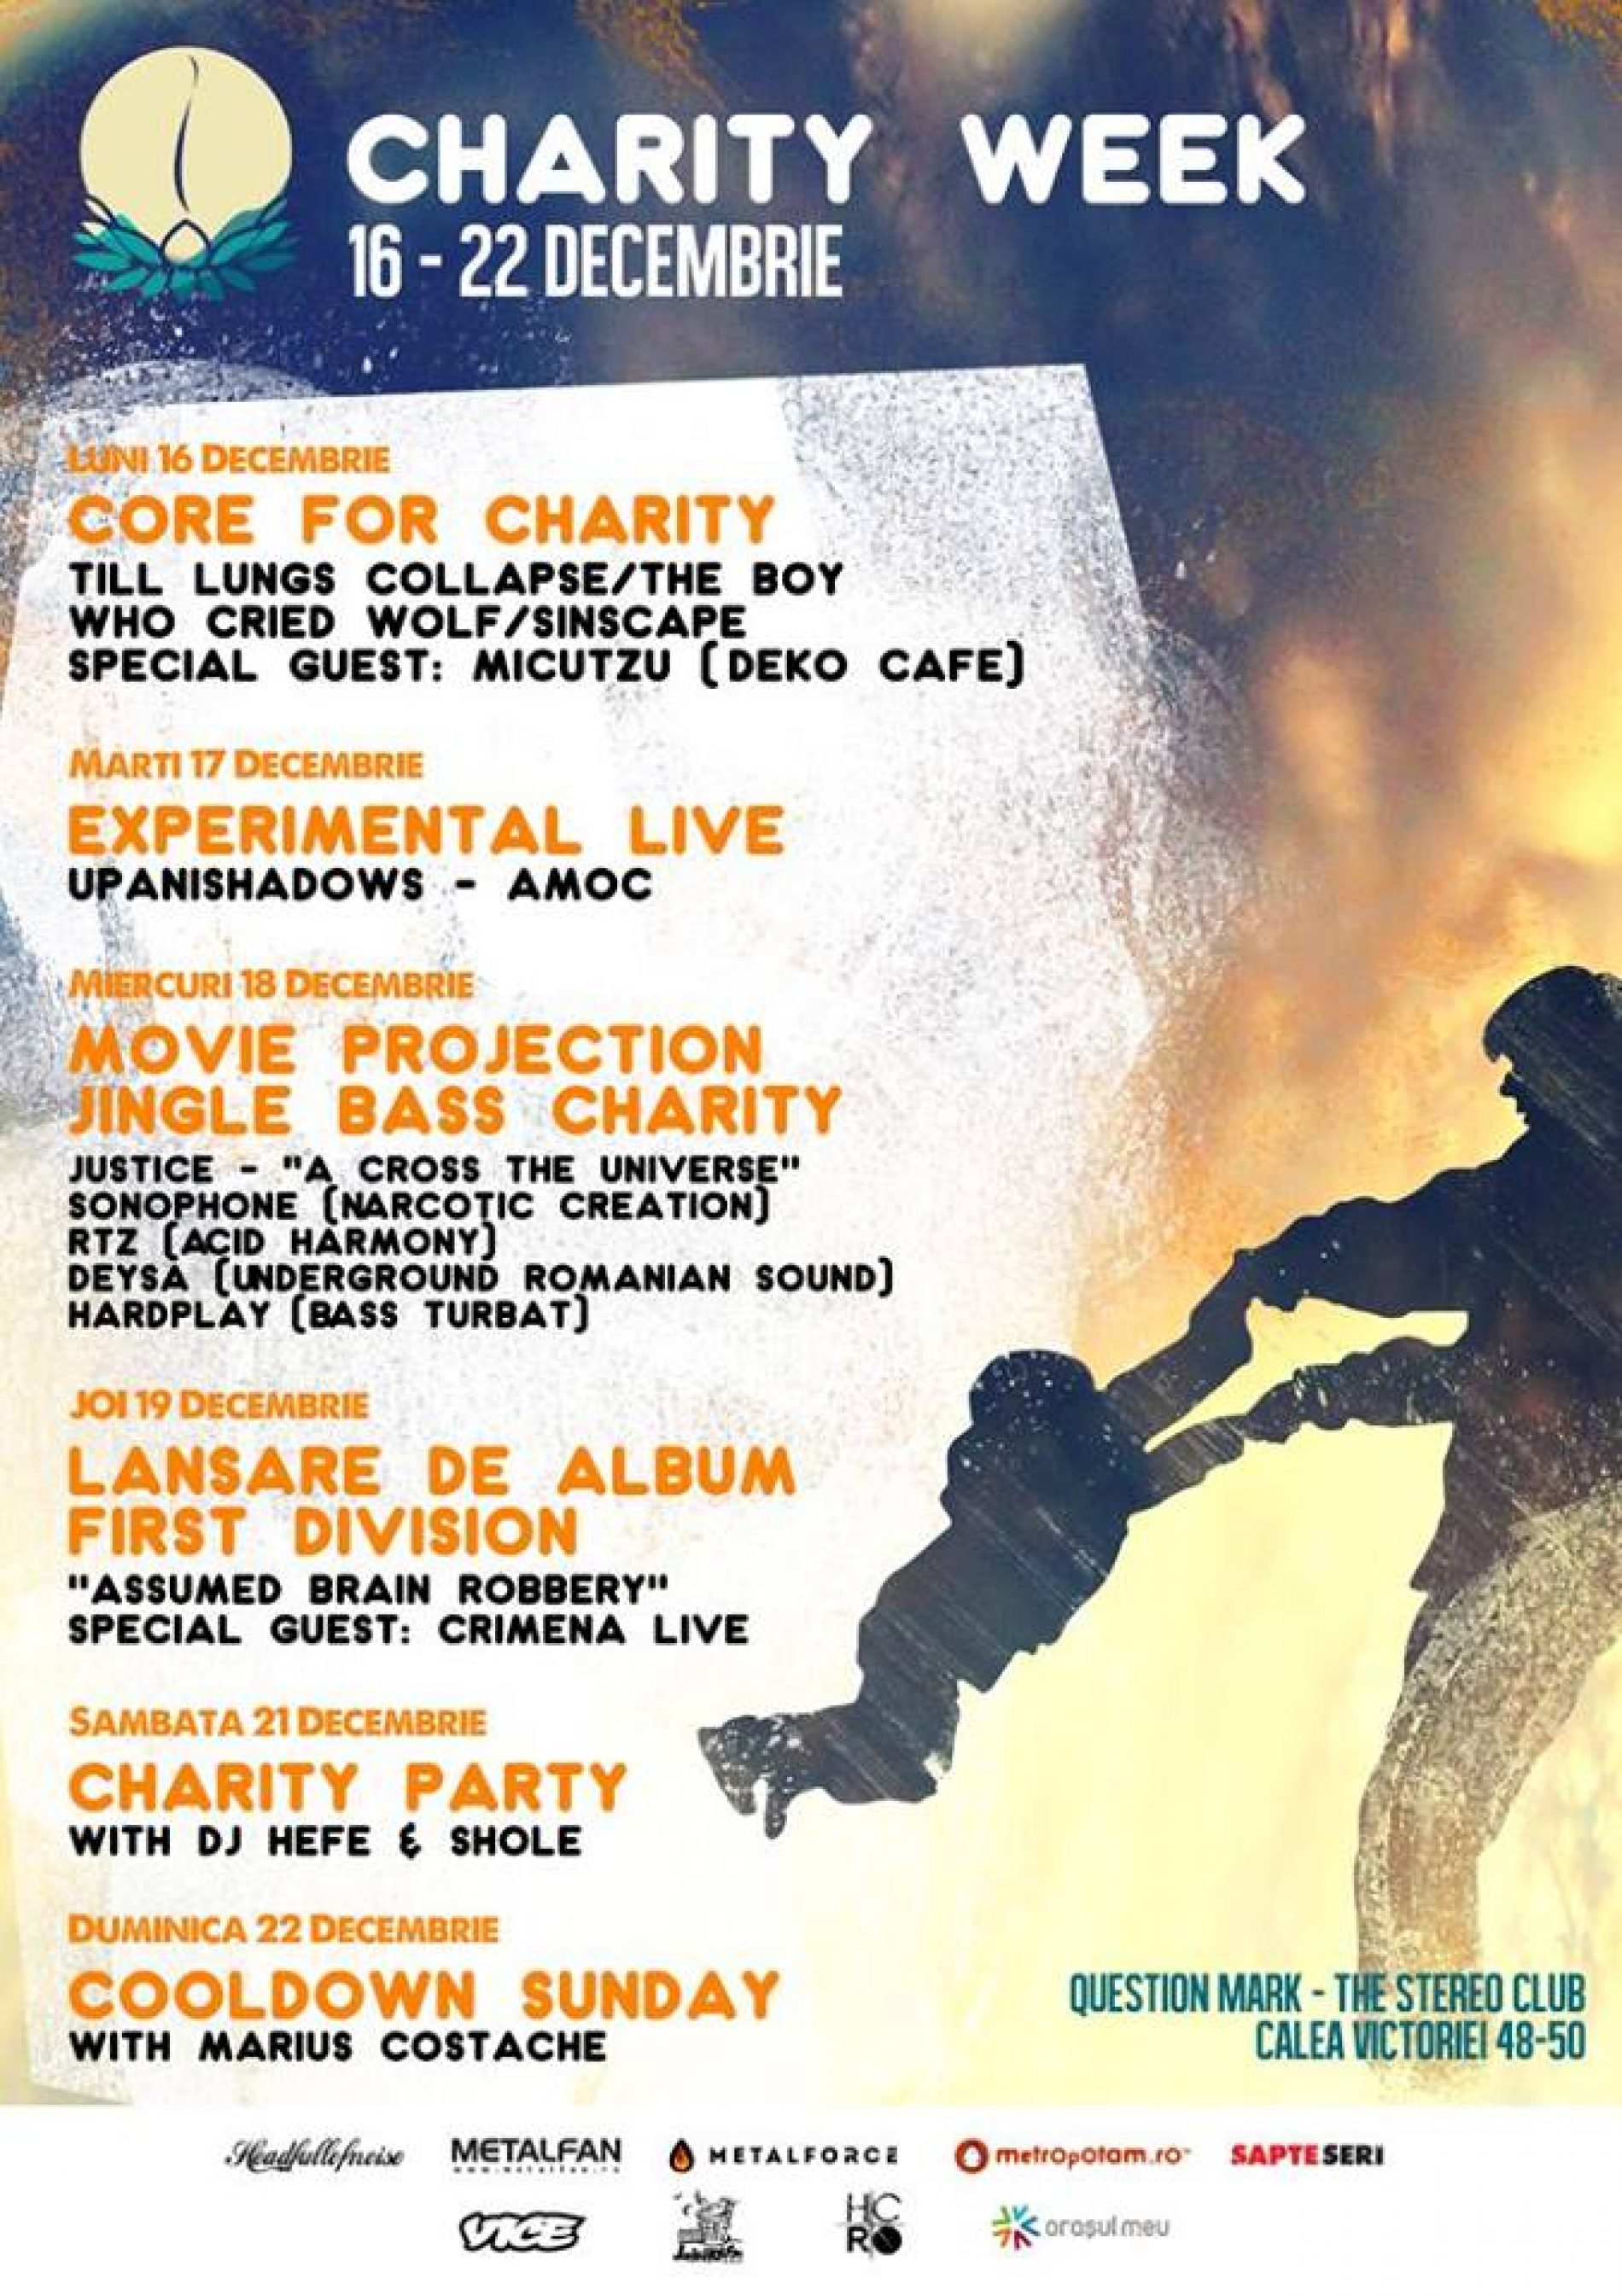 Core for Charity Week in Question Mark Pub 16-22 decembrie ( update)